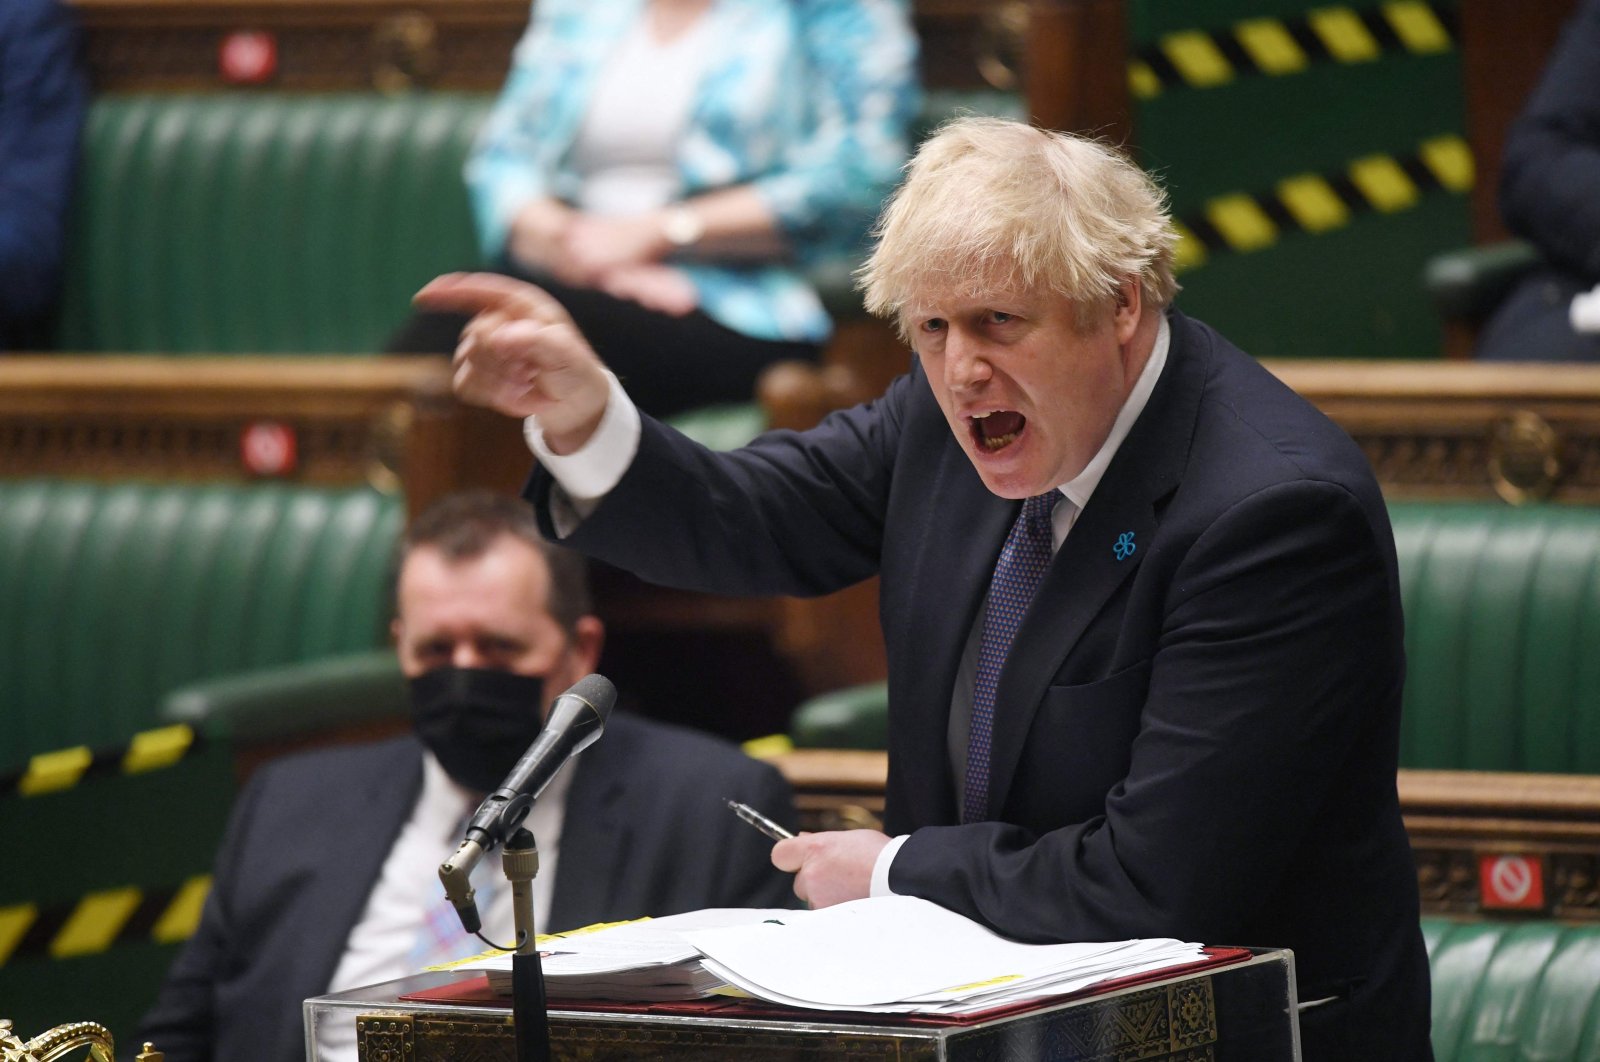 A handout photograph released by the U.K. Parliament shows Britain's Prime Minister Boris Johnson attending Prime Minister's Questions (PMQs) in a socially distanced, hybrid session at the House of Commons, in central London, U.K., May 19, 2021. (Jessica Taylor /UK Parliament via AFP)